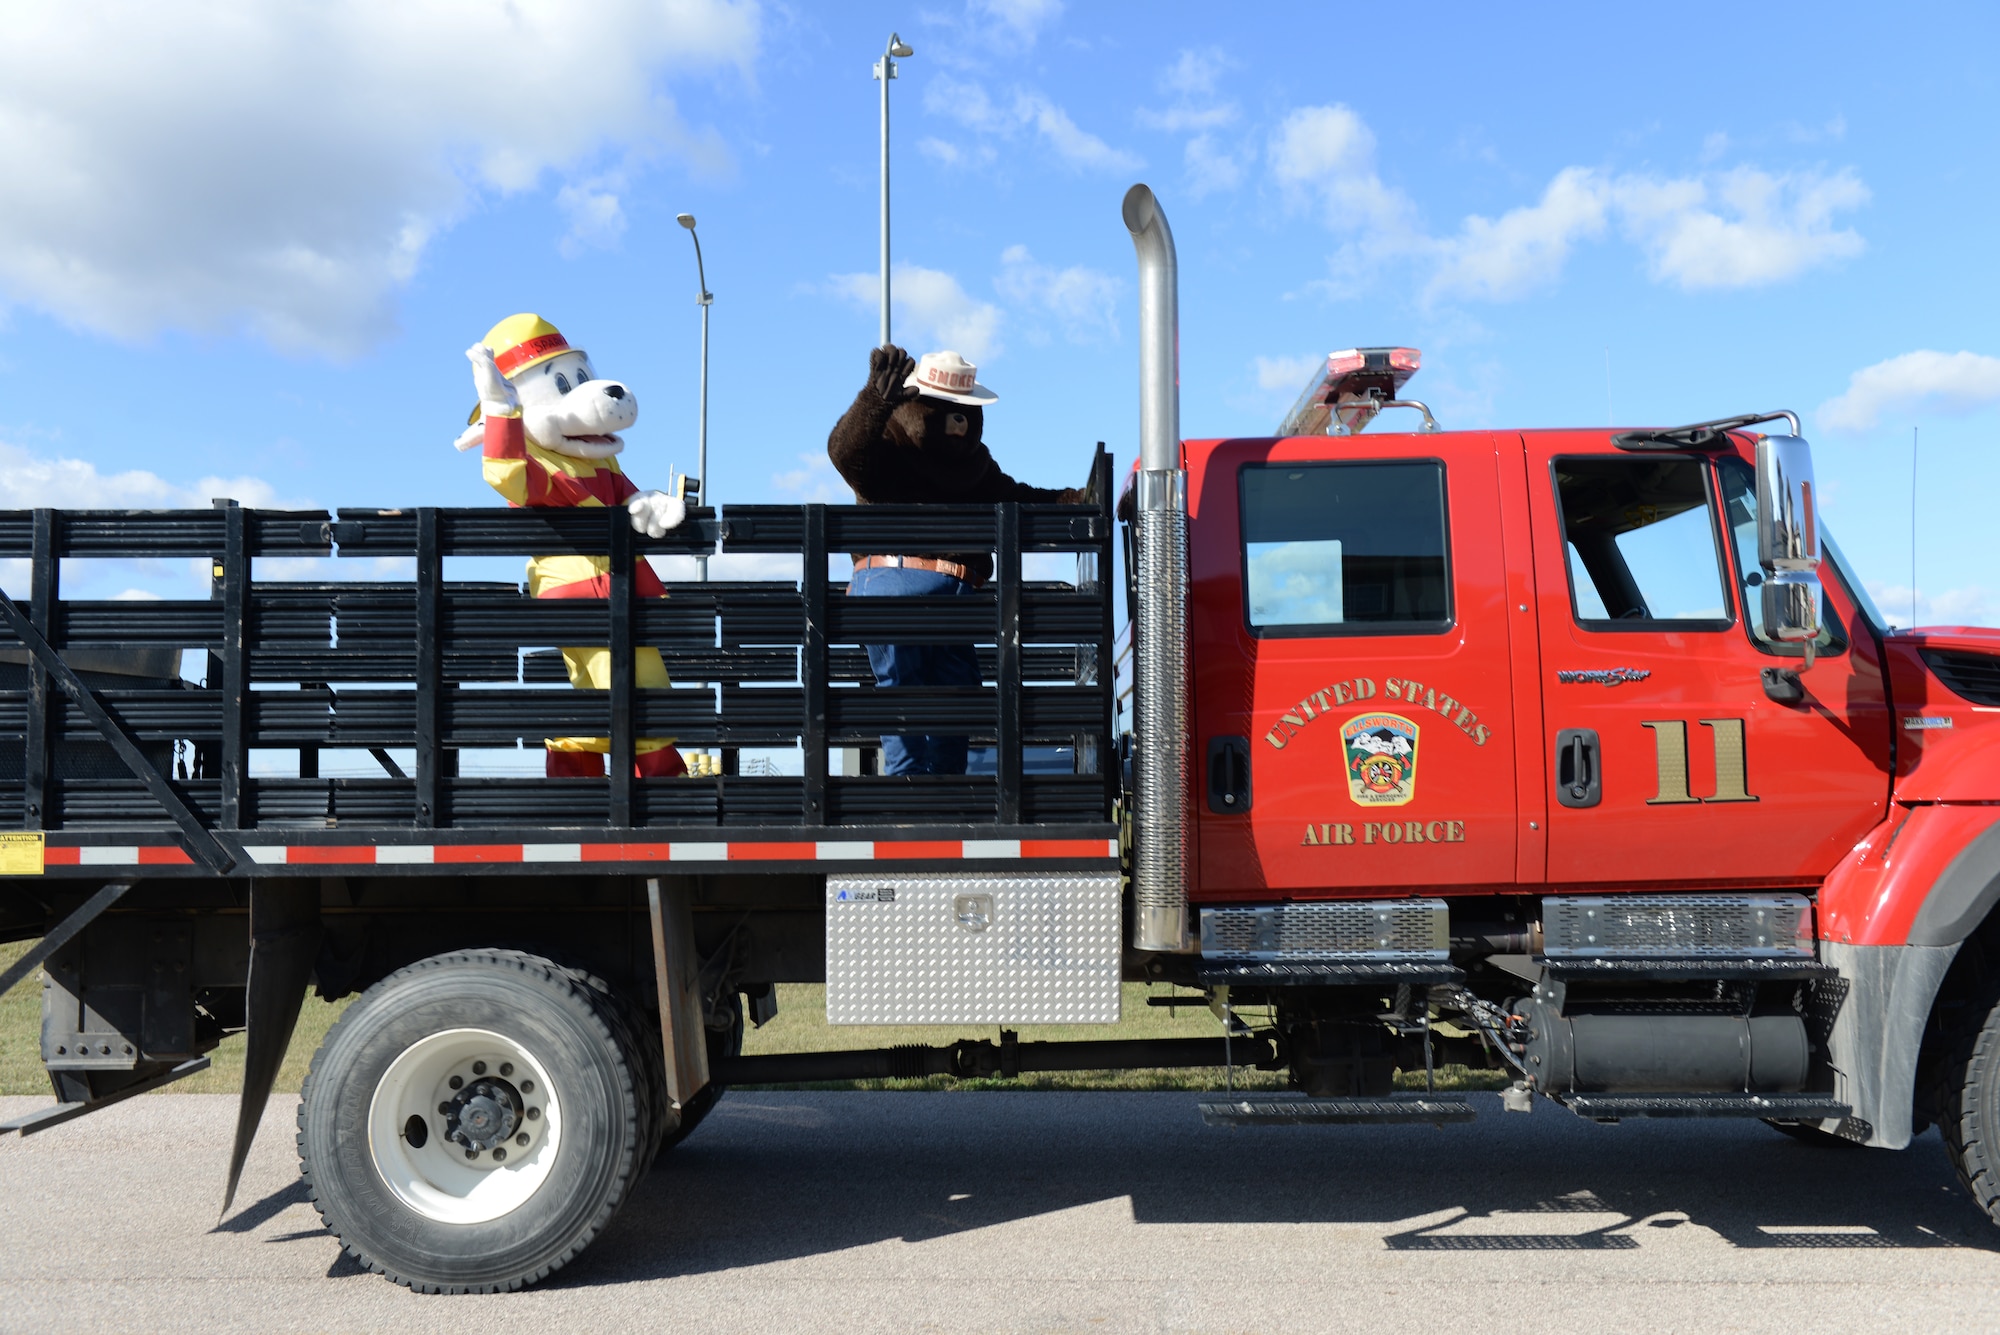 Sparky the Dalmatian and Smoky the Bear wave to children during the Fire Prevention Week Parade at the Prairie View housing area at Ellsworth Air Force Base, S.D., Oct. 5, 2019. Five fire trucks from the 28th Civil Engineer Squadron Fire Department drove through base housing during the parade and promoted Fire Prevention Week, which commemorates the “Great Chicago Fire” from 1871. (U.S. Air Force photo by Airman Quentin K. Marx)